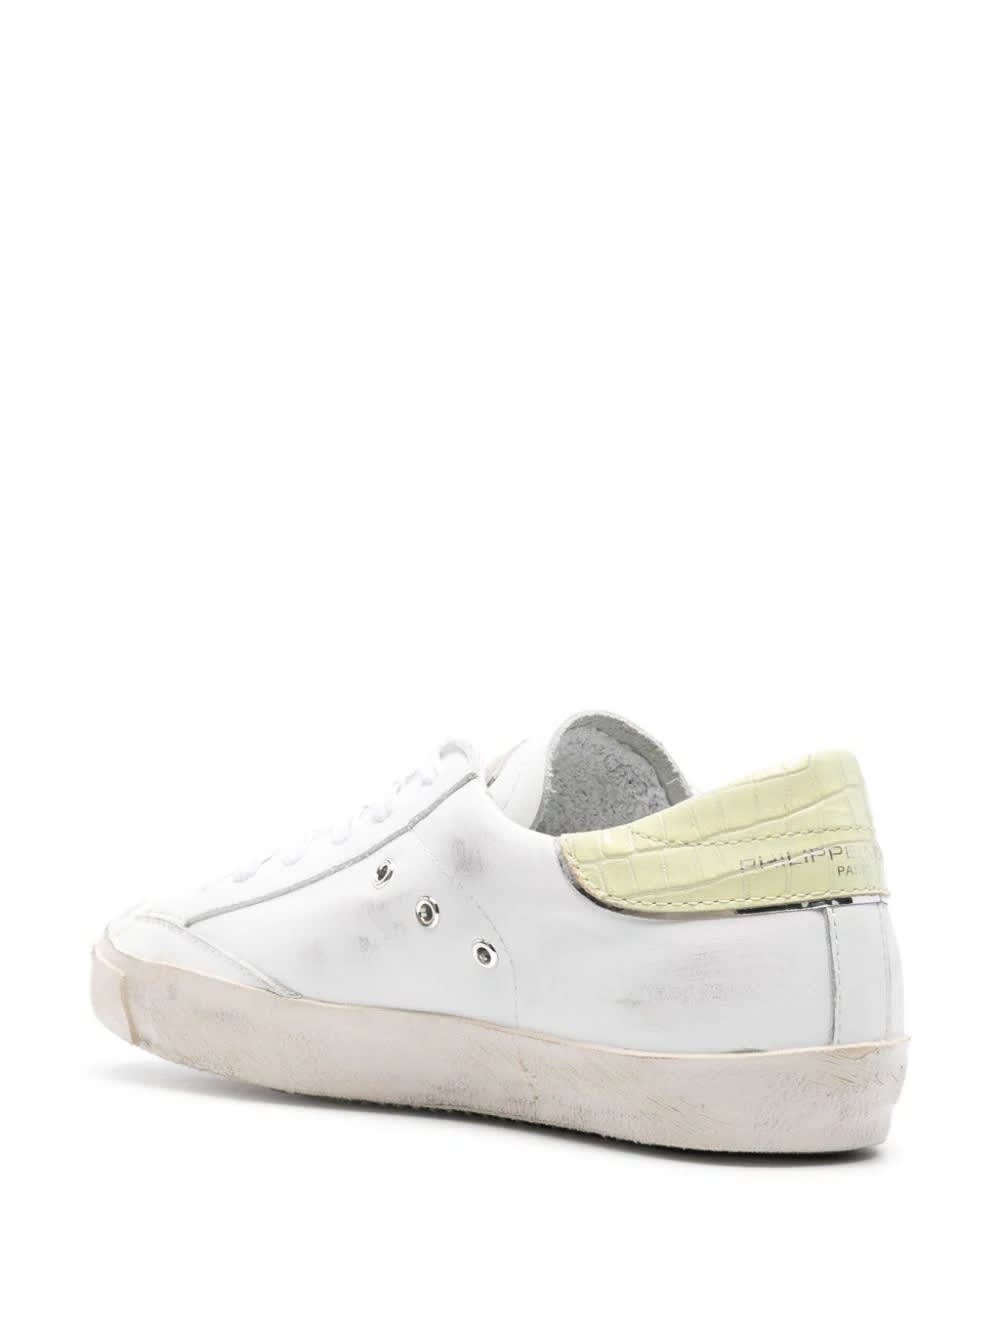 Shop Philippe Model Prsx Low Sneakers - White And Yellow